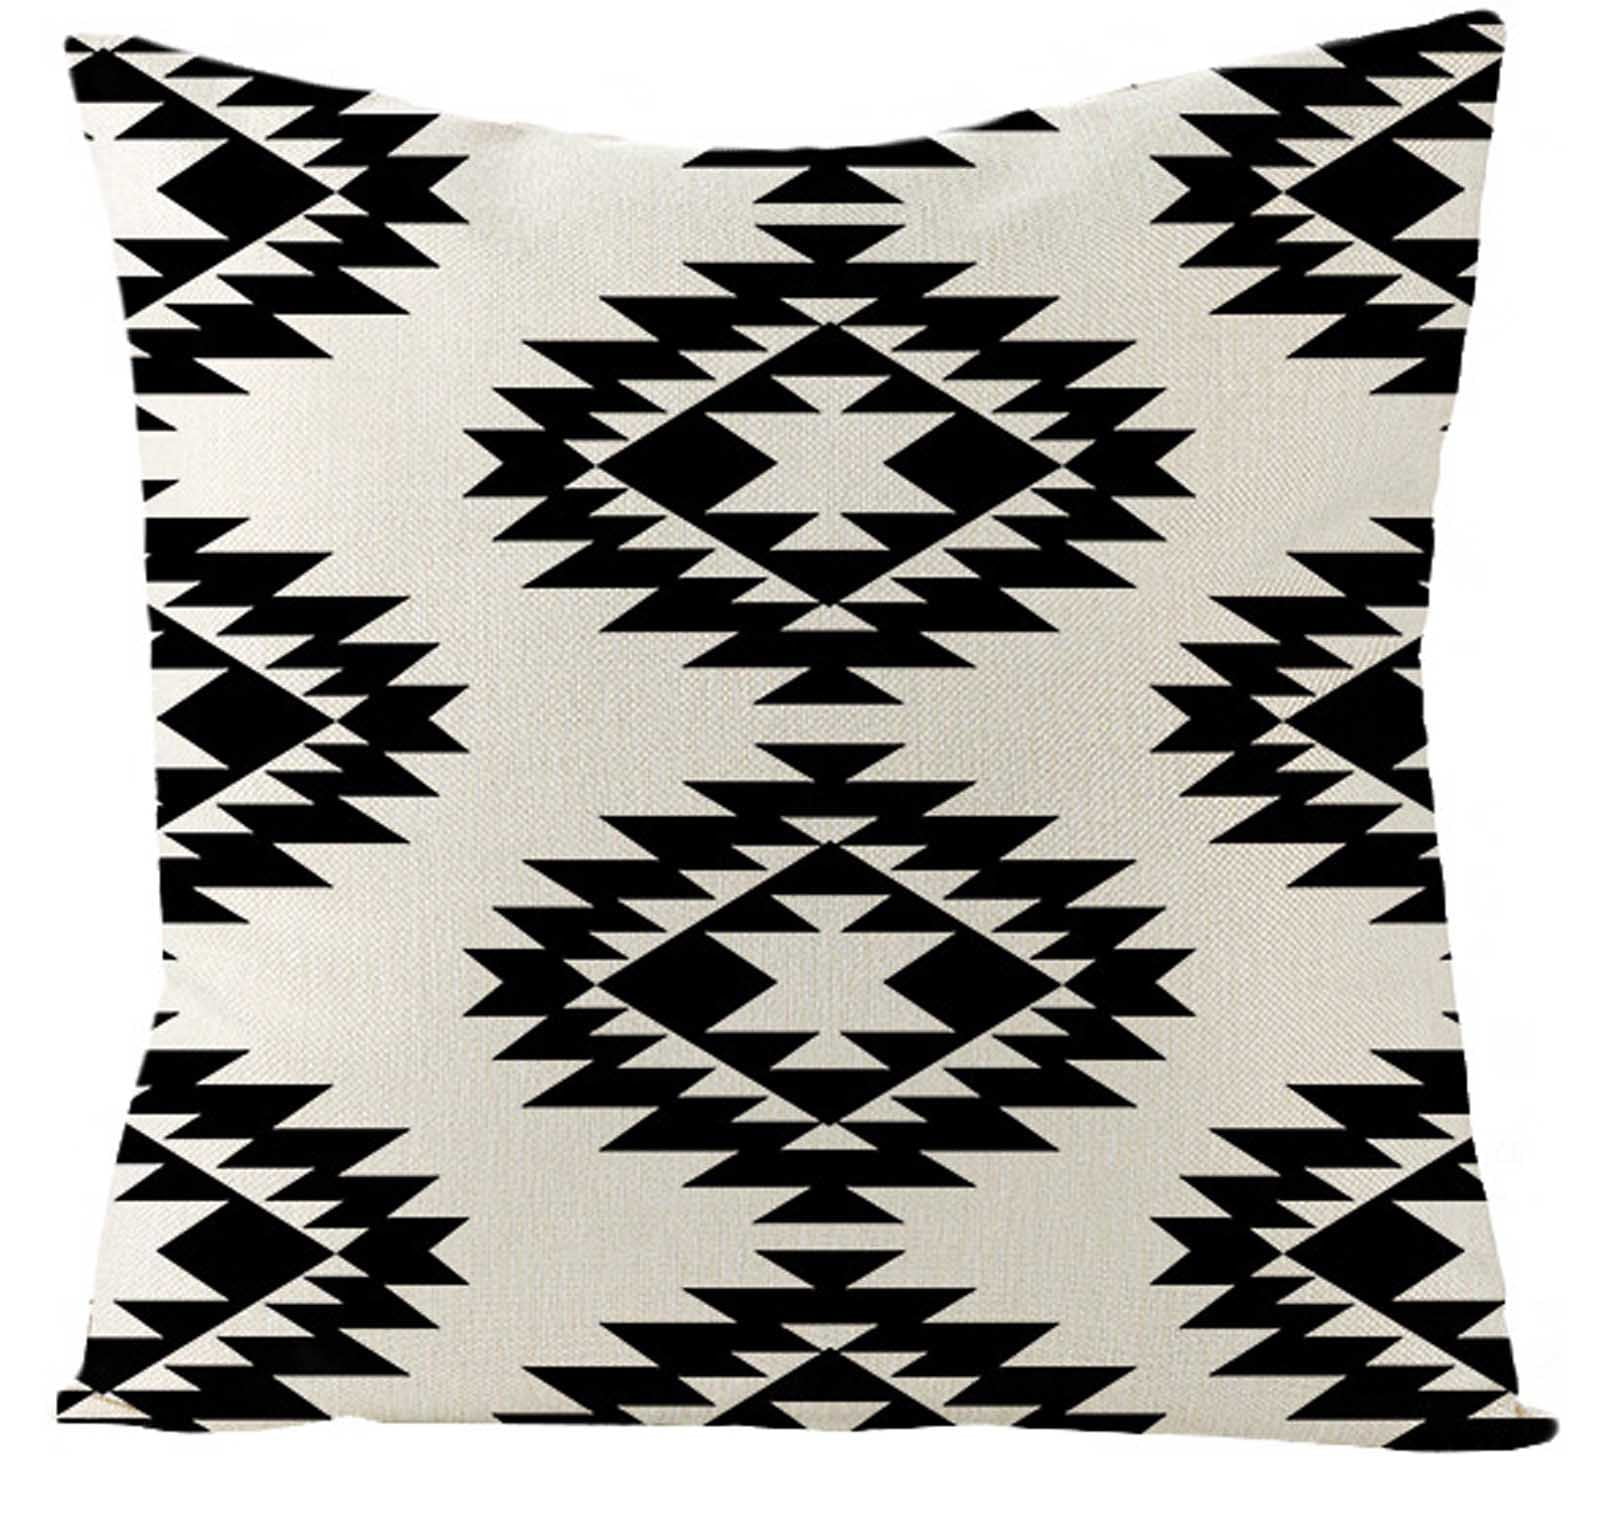 18" Geometric Black & White Pillow Case Linen Throw Sofa Couch Cushion Cover New 